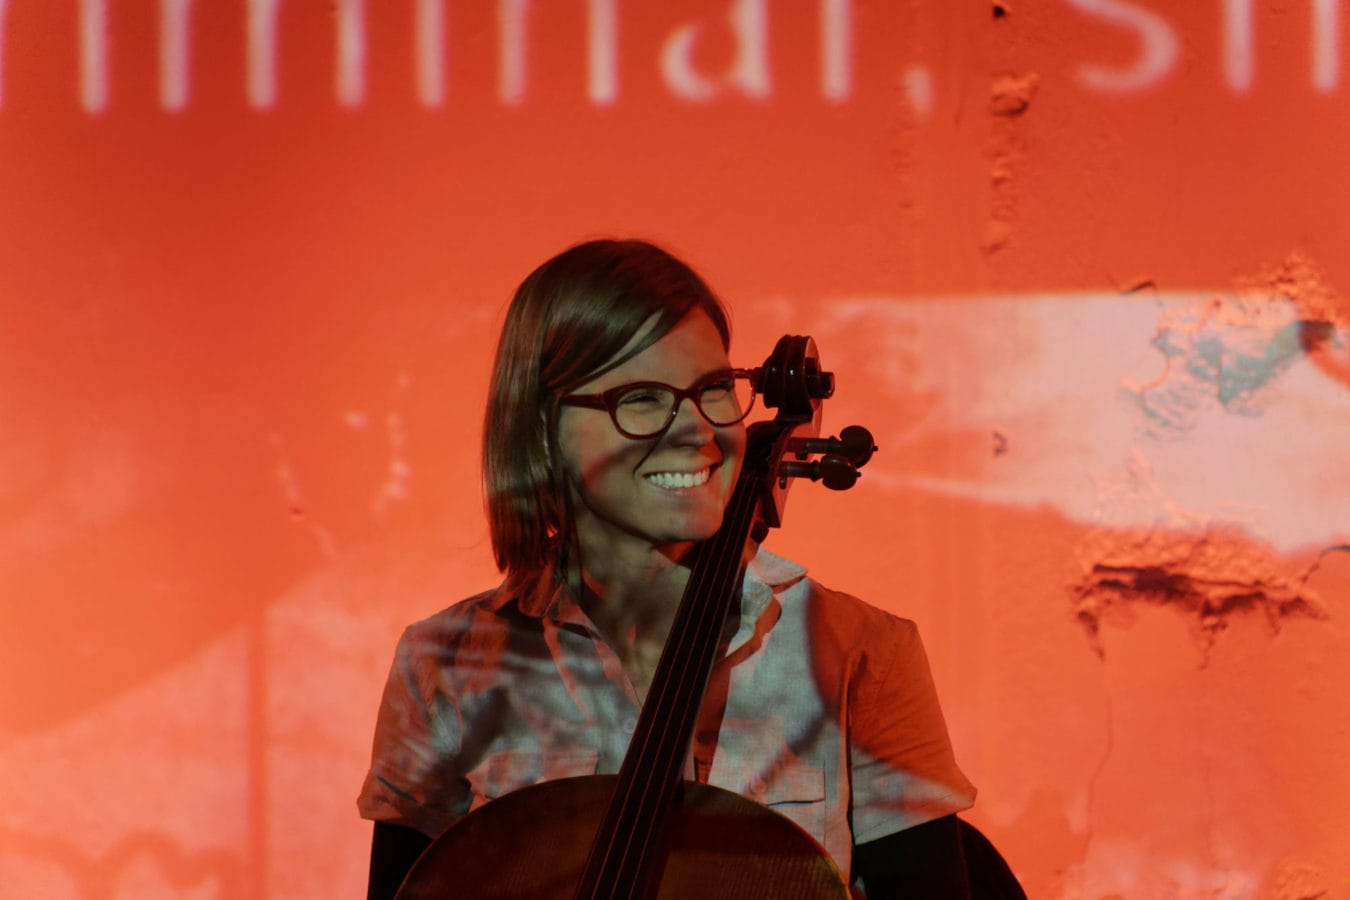 Cellist Amanda Gookin performing in the Dupont Underground as part of the Kennedy Center Direct Current Festival on March 29. Photo by Anu Dev.